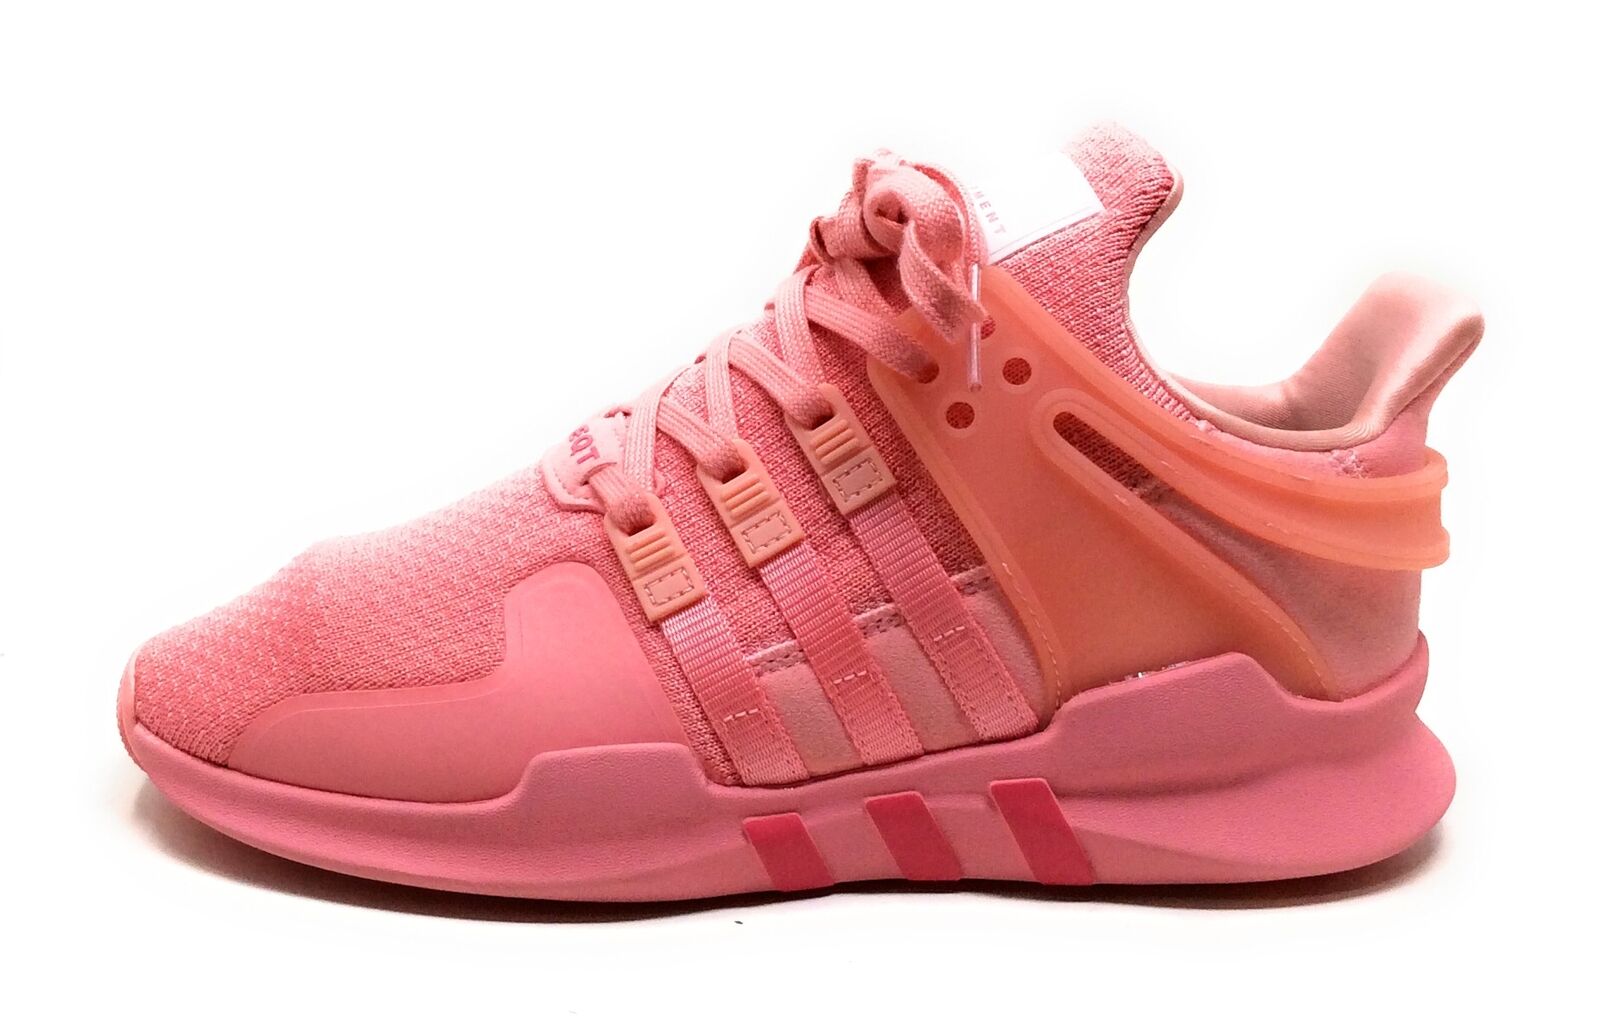 Adidas Womens EQT Support ADV W Walking Shoes Pop Pink Size 6.5 M US